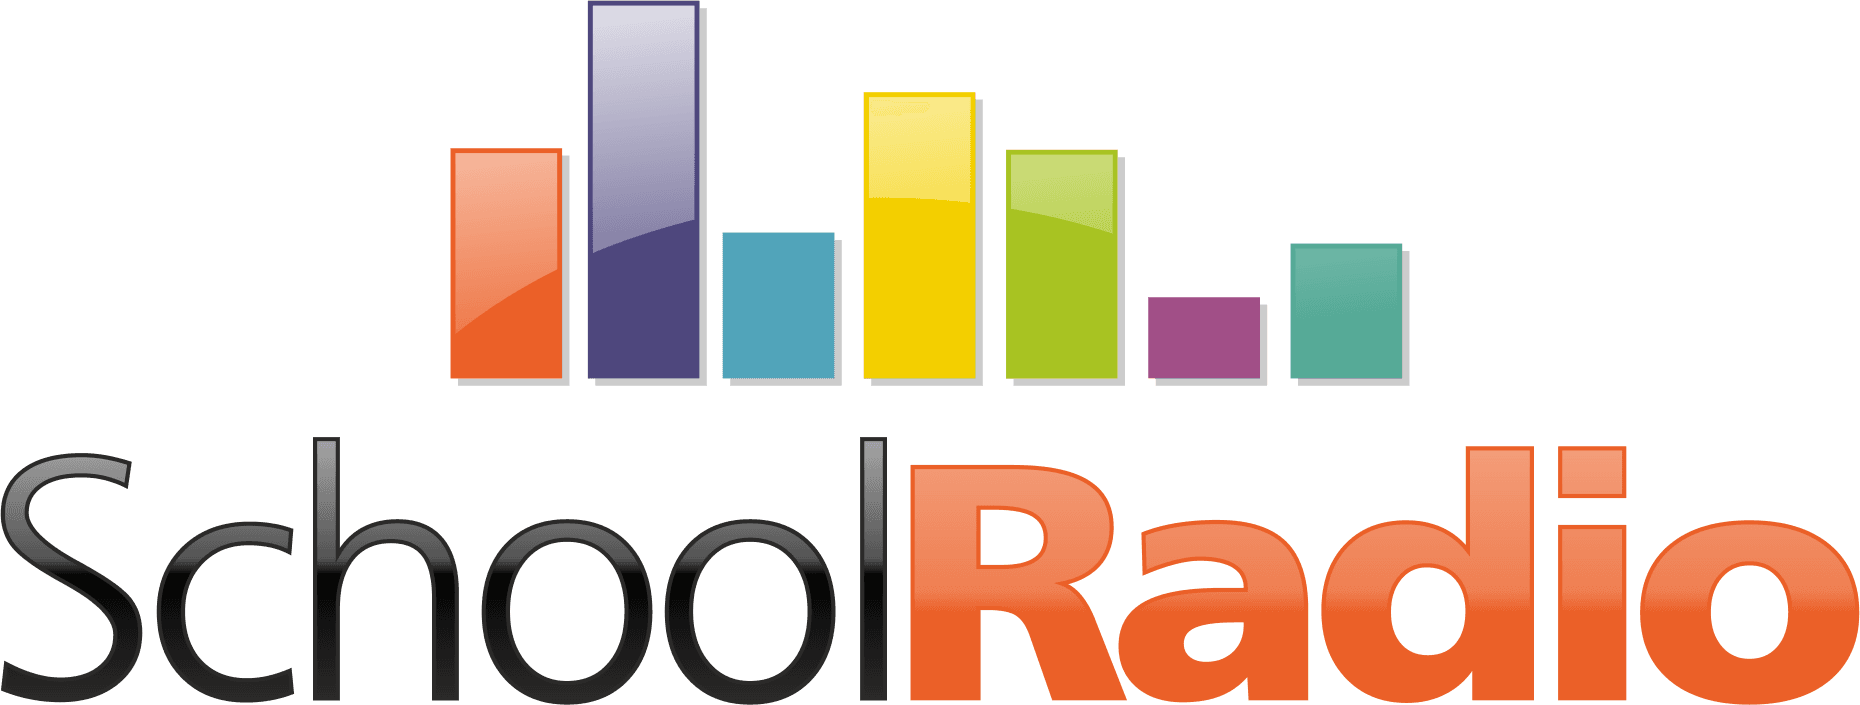 A logo for school radio with a rainbow of colors